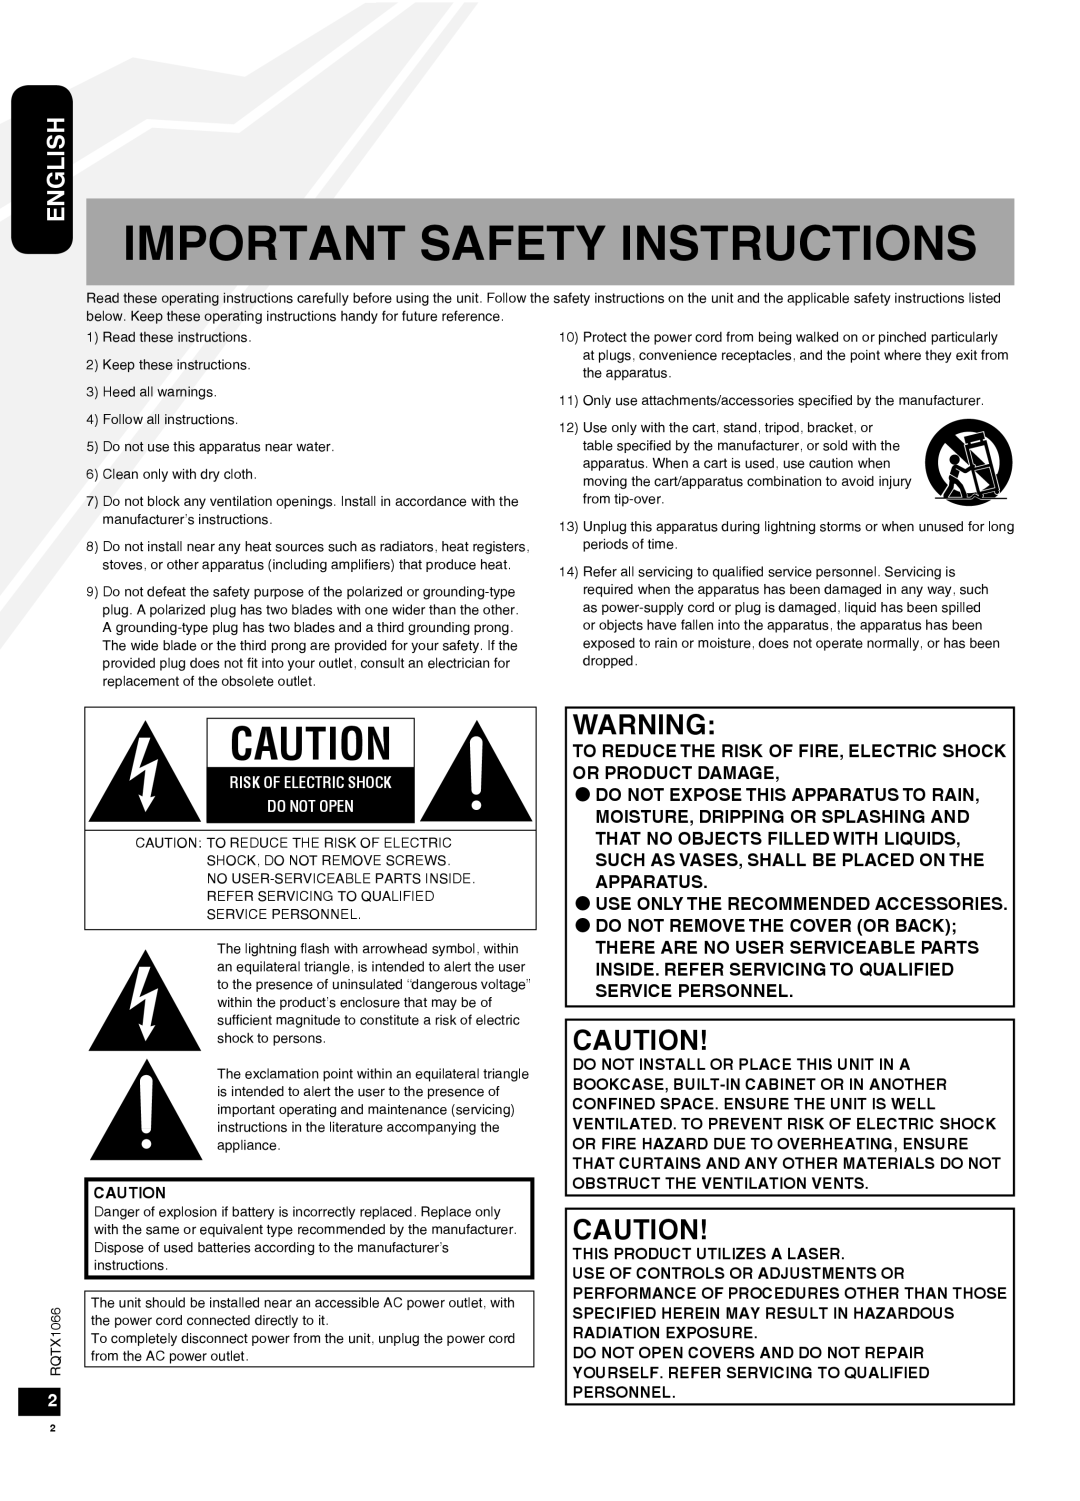 Panasonic SC-HC30 operating instructions Important Safety Instructions, English, Use Only The Recommended Accessories 